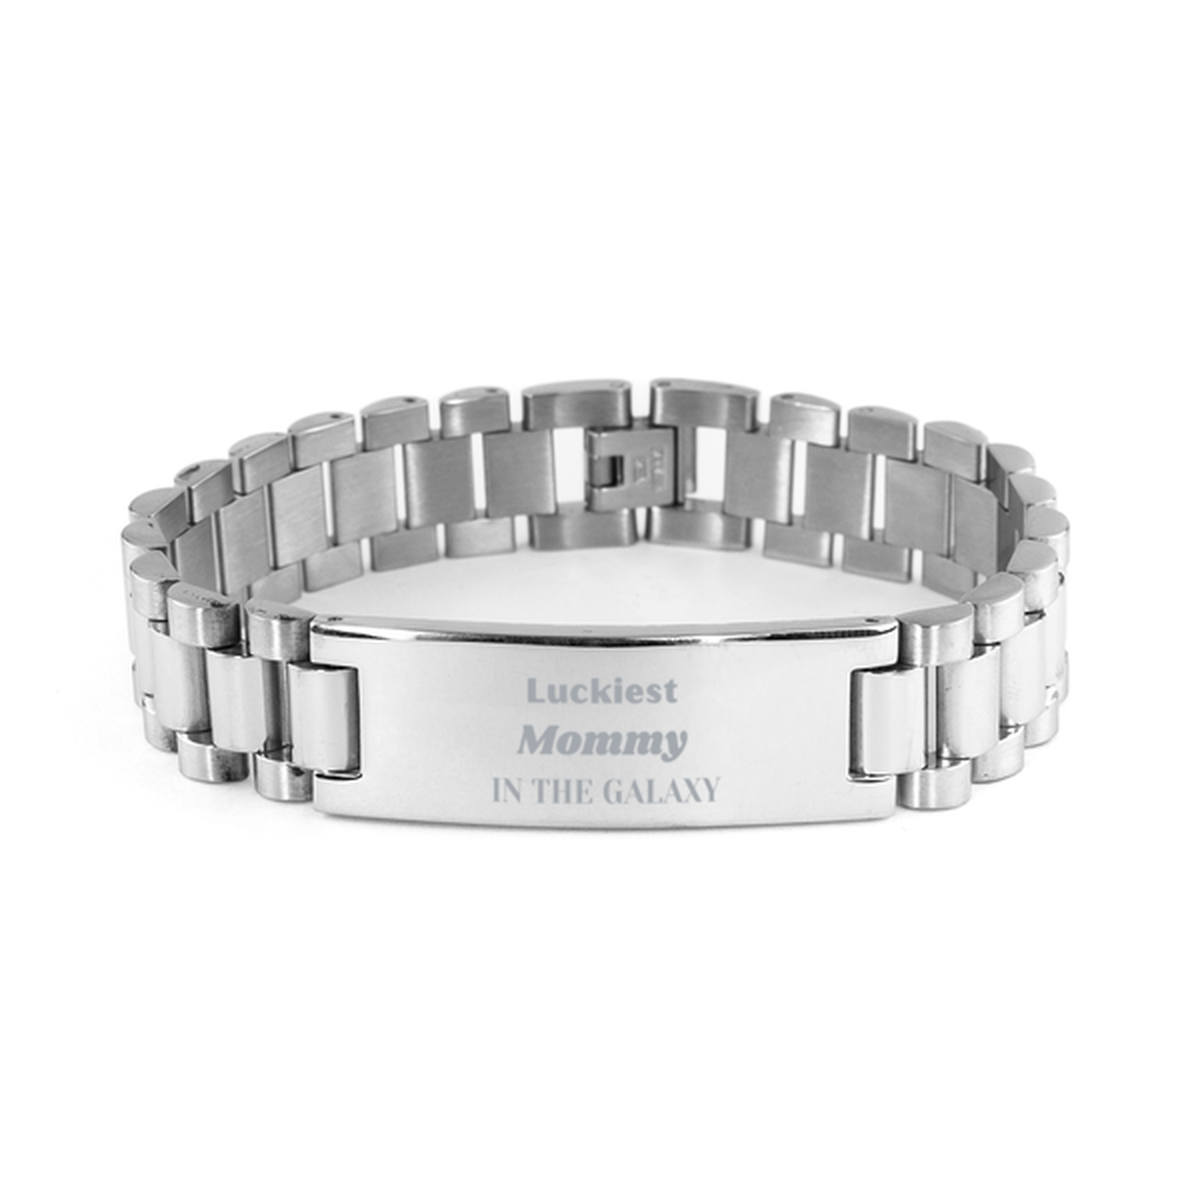 Luckiest Mommy in the Galaxy, To My Mommy Engraved Gifts, Christmas Mommy Ladder Stainless Steel Bracelet Gifts, X-mas Birthday Unique Gifts For Mommy Men Women